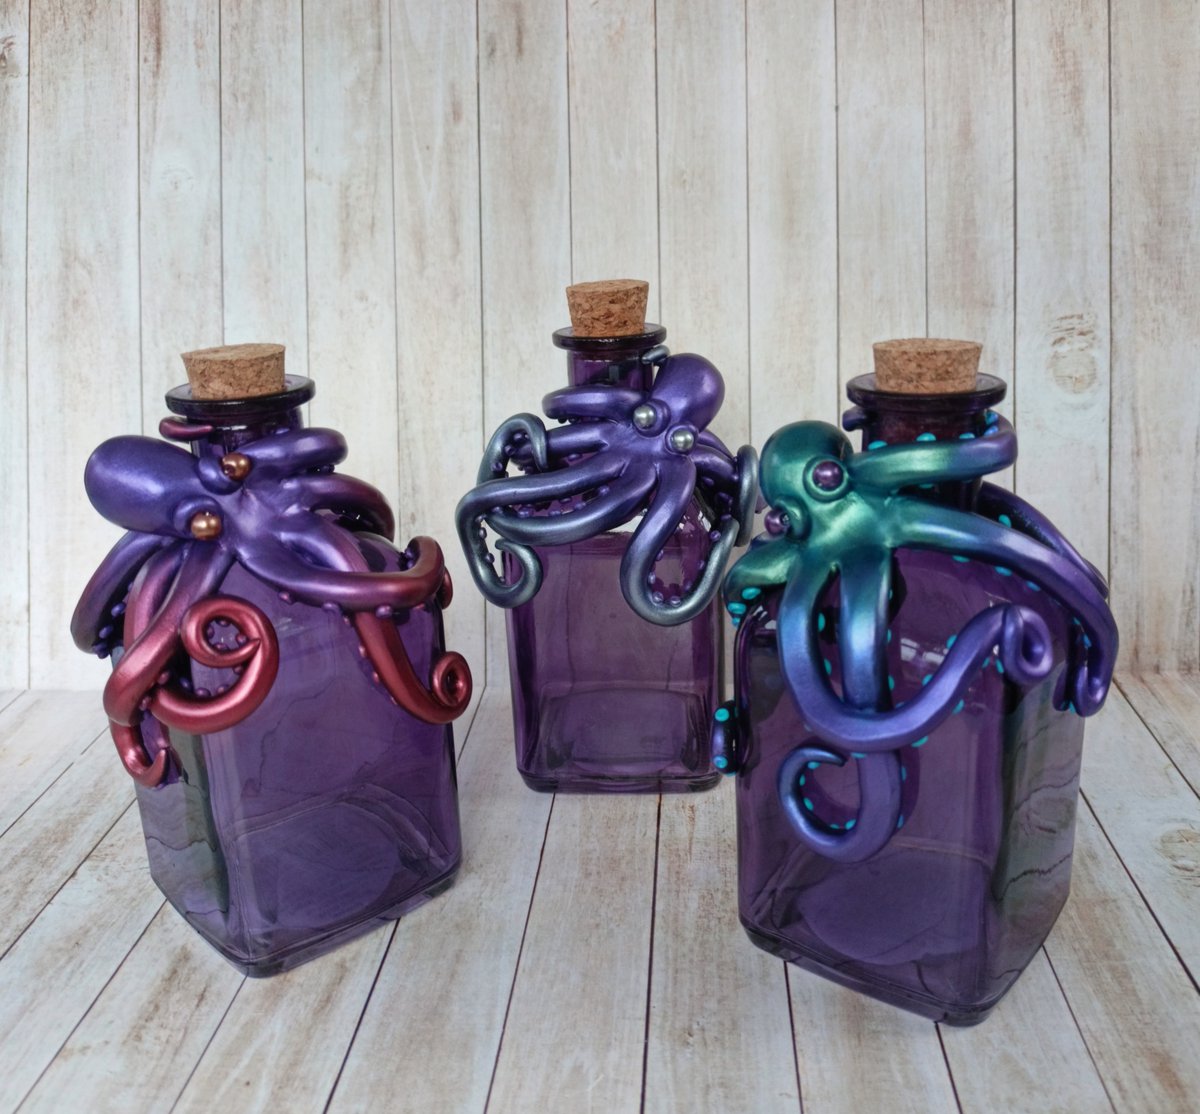 Purple glass bottles with an octopus sculpture are now available in my Etsy shop! There's a choice of colours for your octopus :) #octopus #giftideas #etsy etsy.me/3MmMeWp via @Etsy